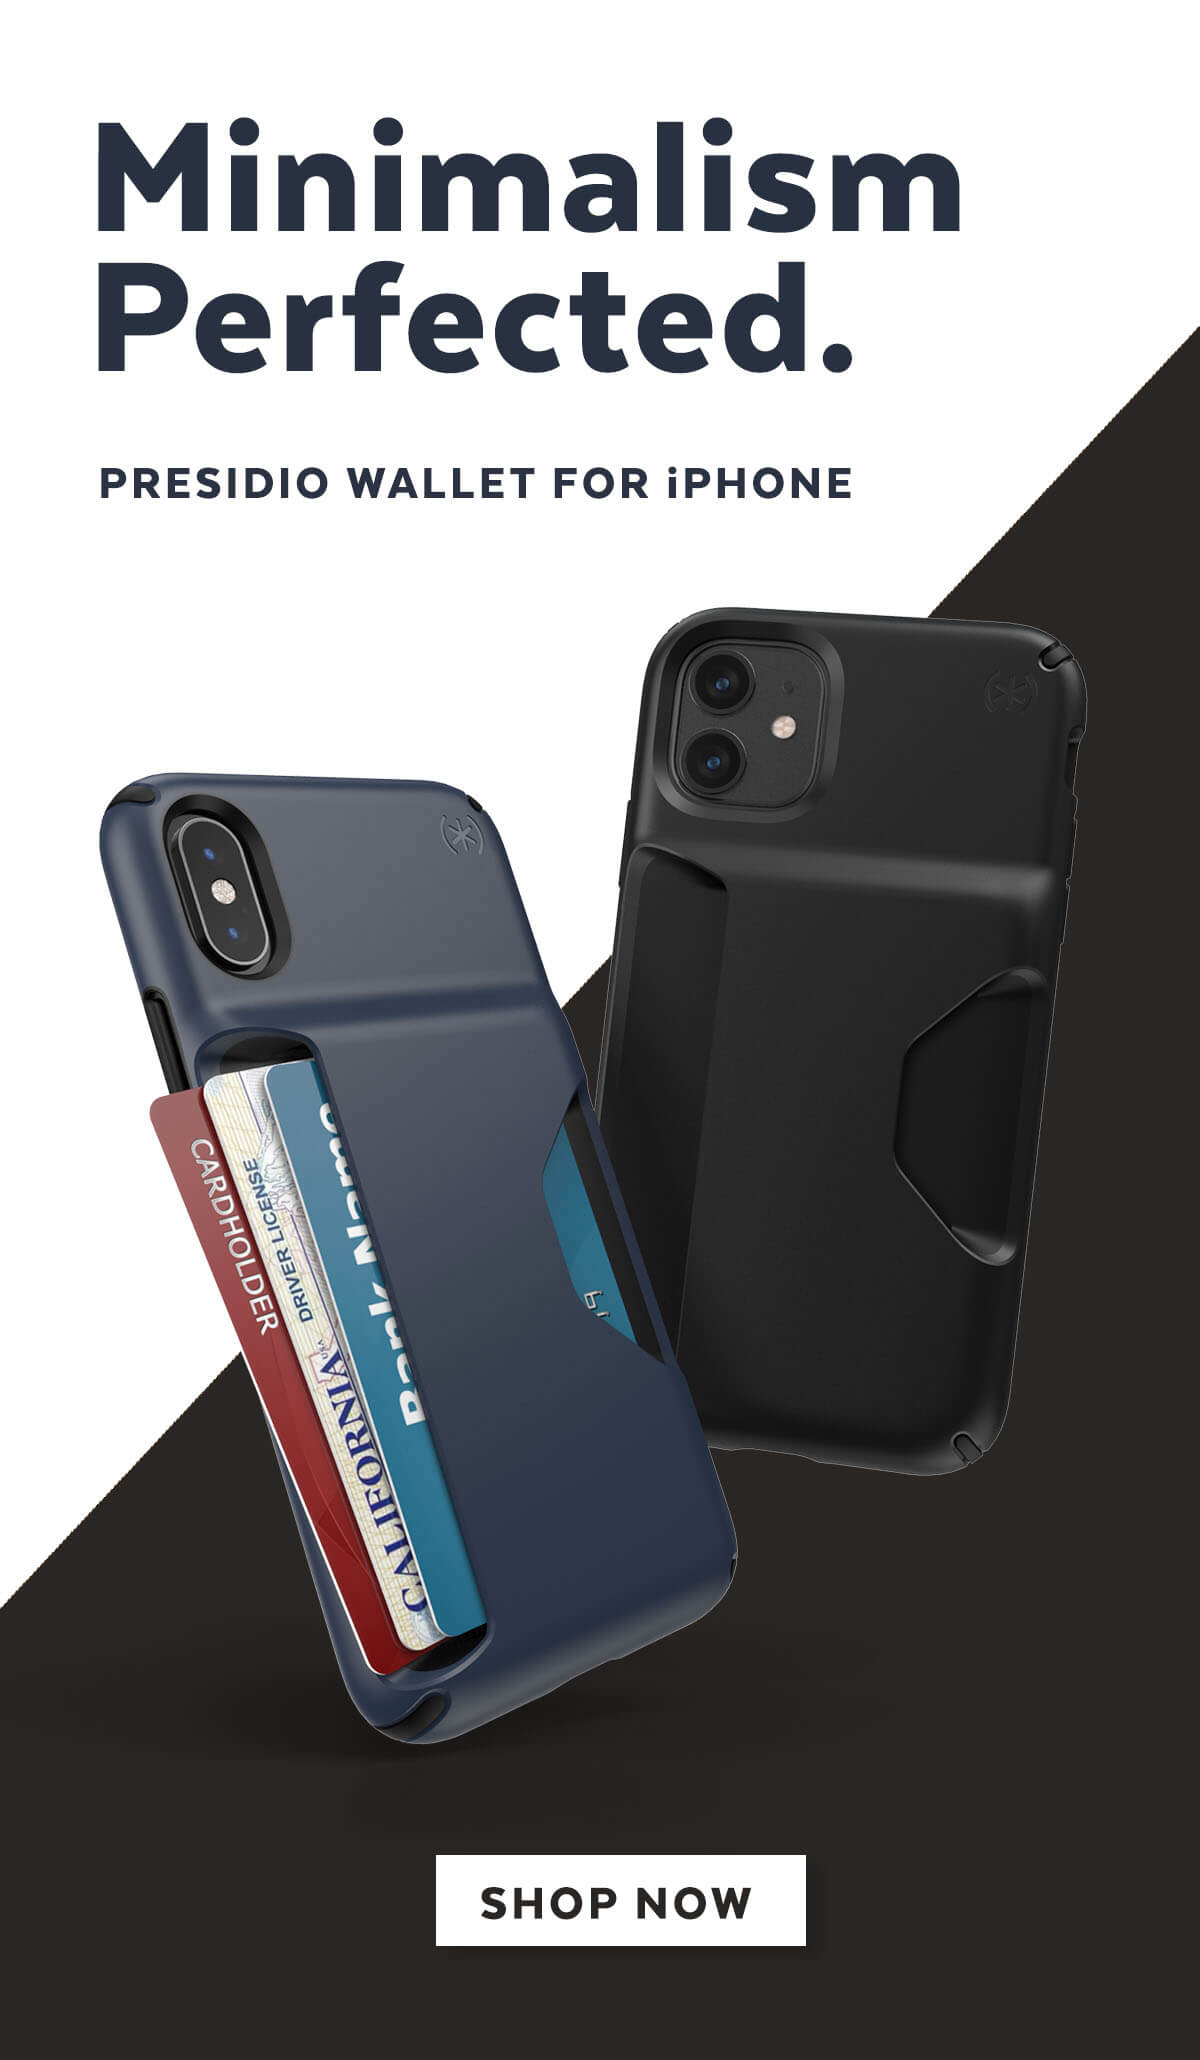 Minimalism perfected. Presidio wallet for iPhone. Shop now.